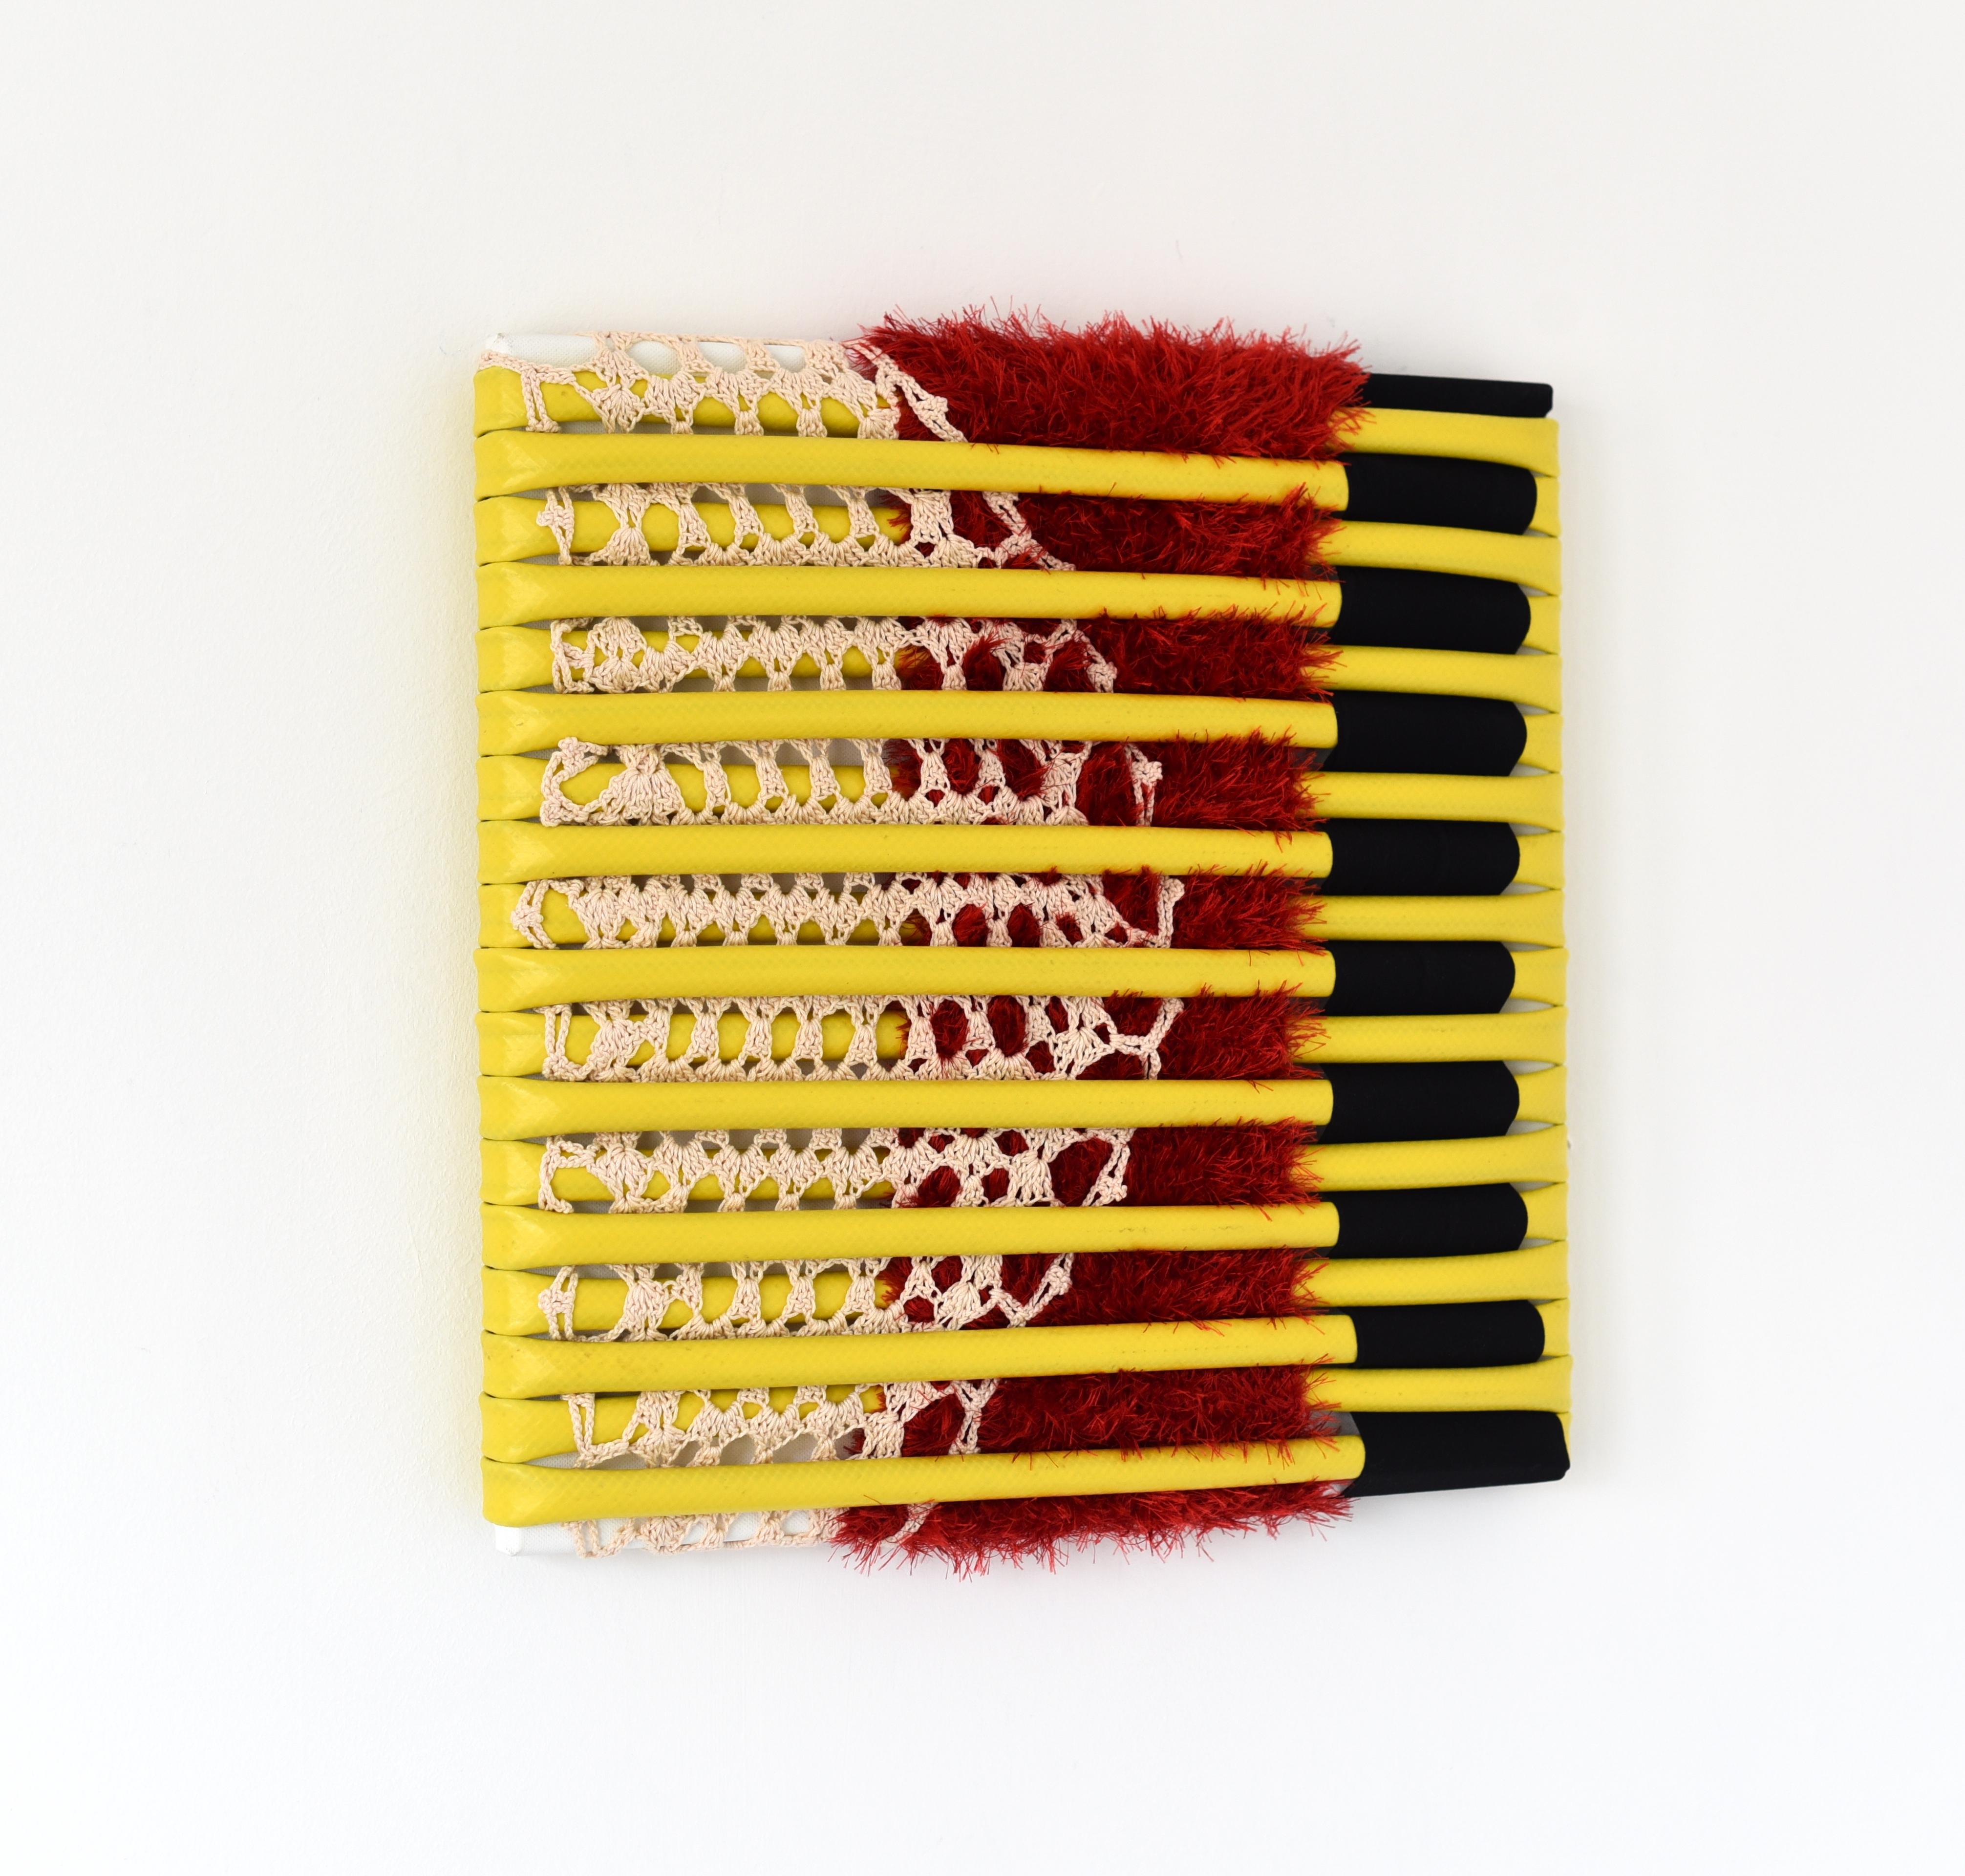 Untitled 1 (yellow, red, black, fabric wall art, abstract sculpture, stripes) - Yellow Abstract Sculpture by Anna-Lena Sauer